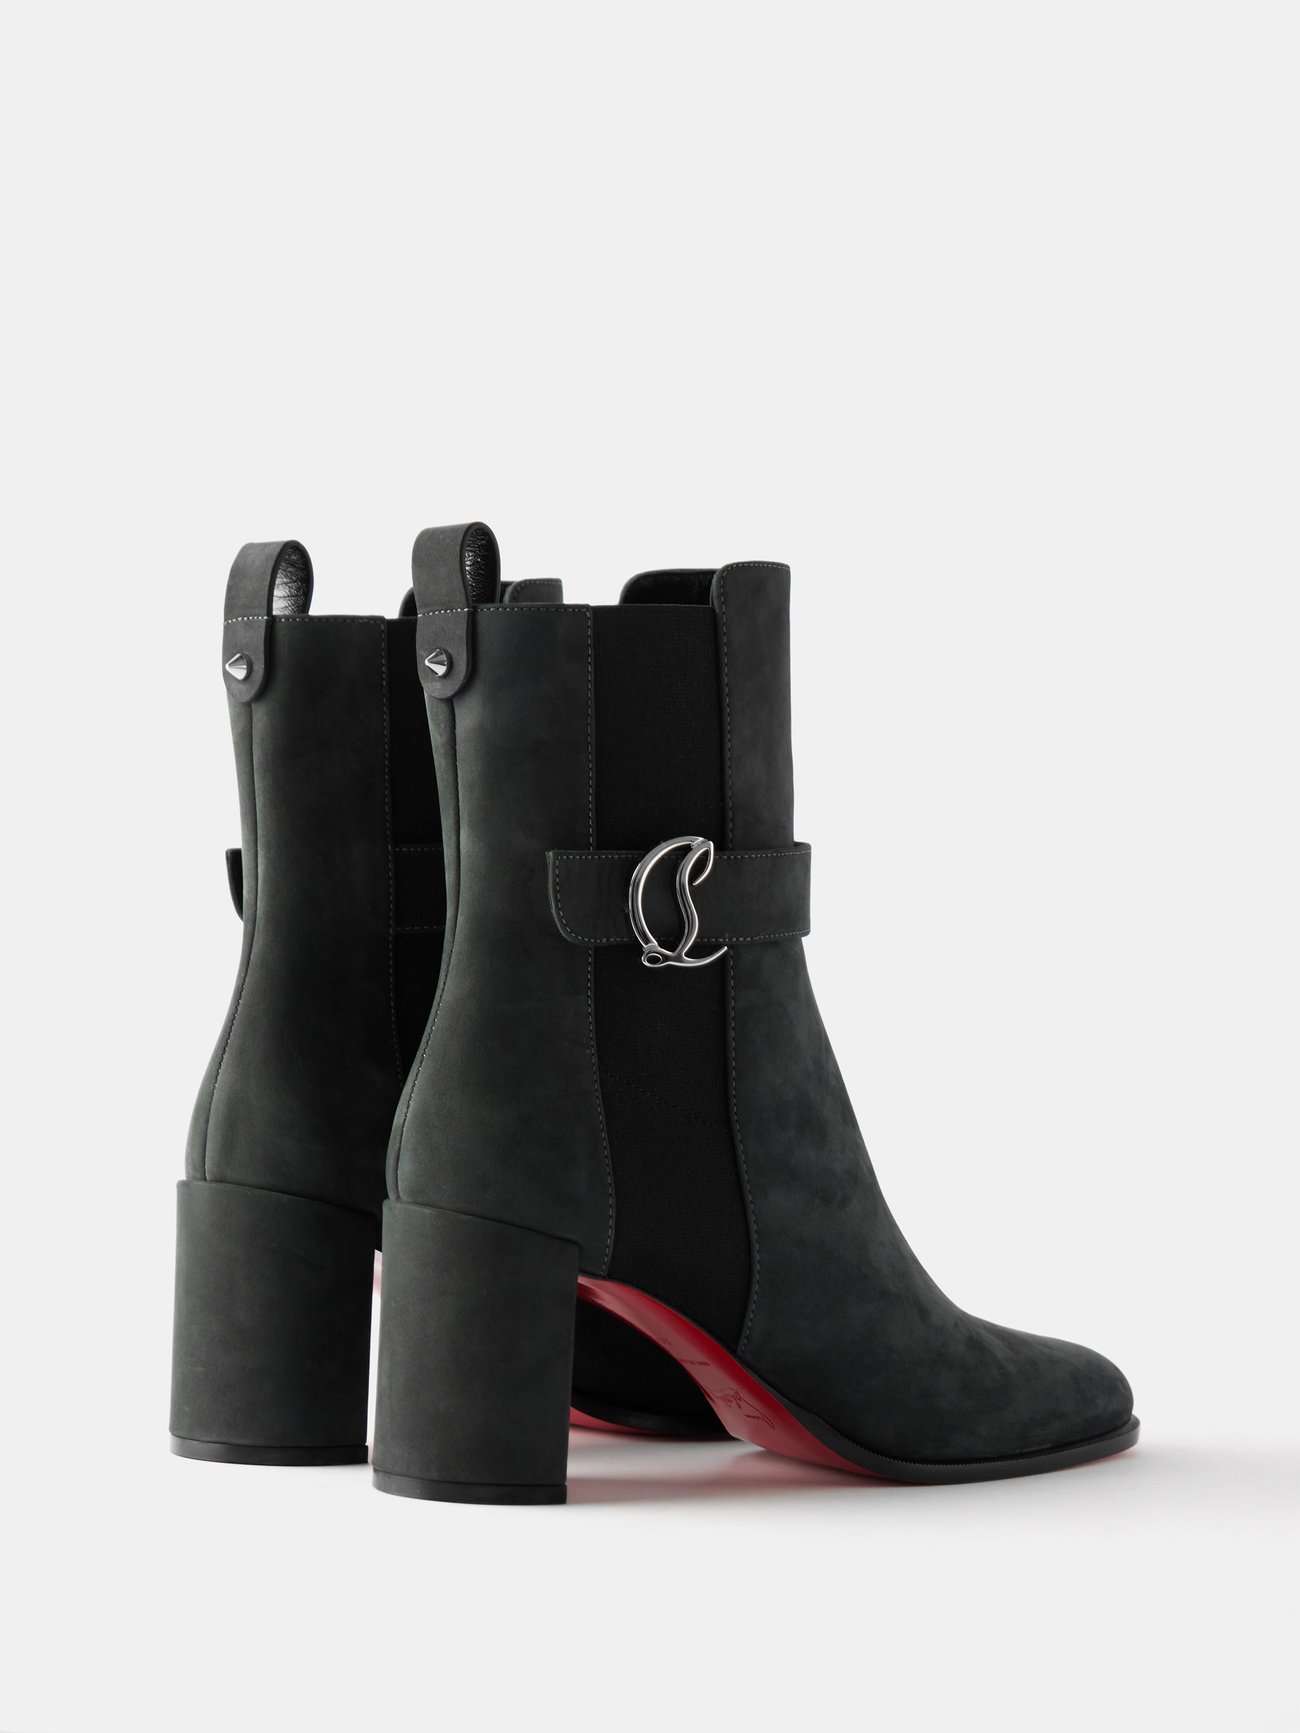 CL Chelsea Booty - 70 mm Low boots - Calf leather - Black - Christian  Louboutin